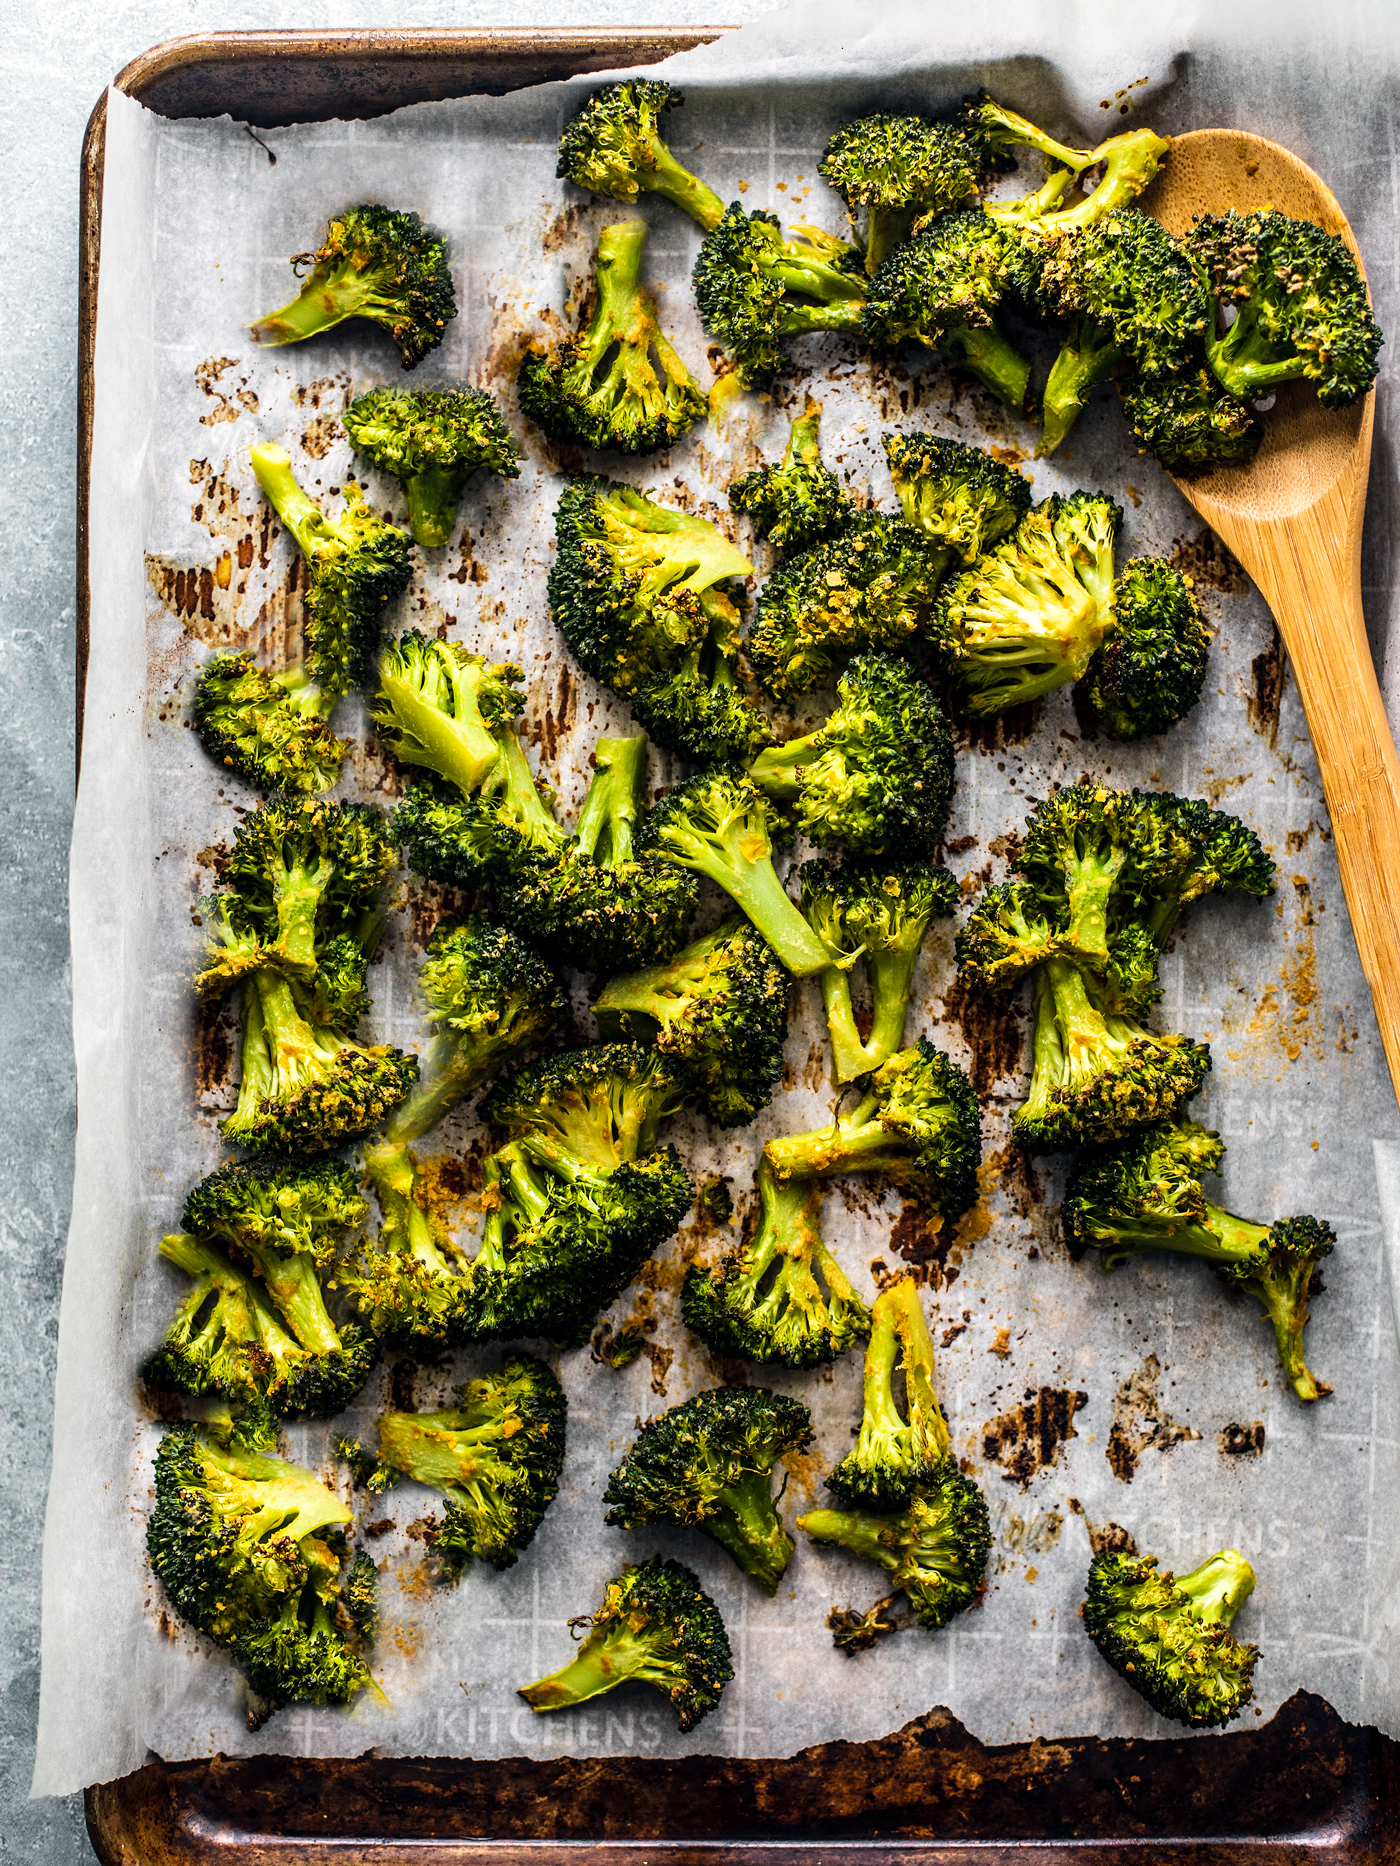 Sheet pan covered with parchment and roasted broccoli florets.